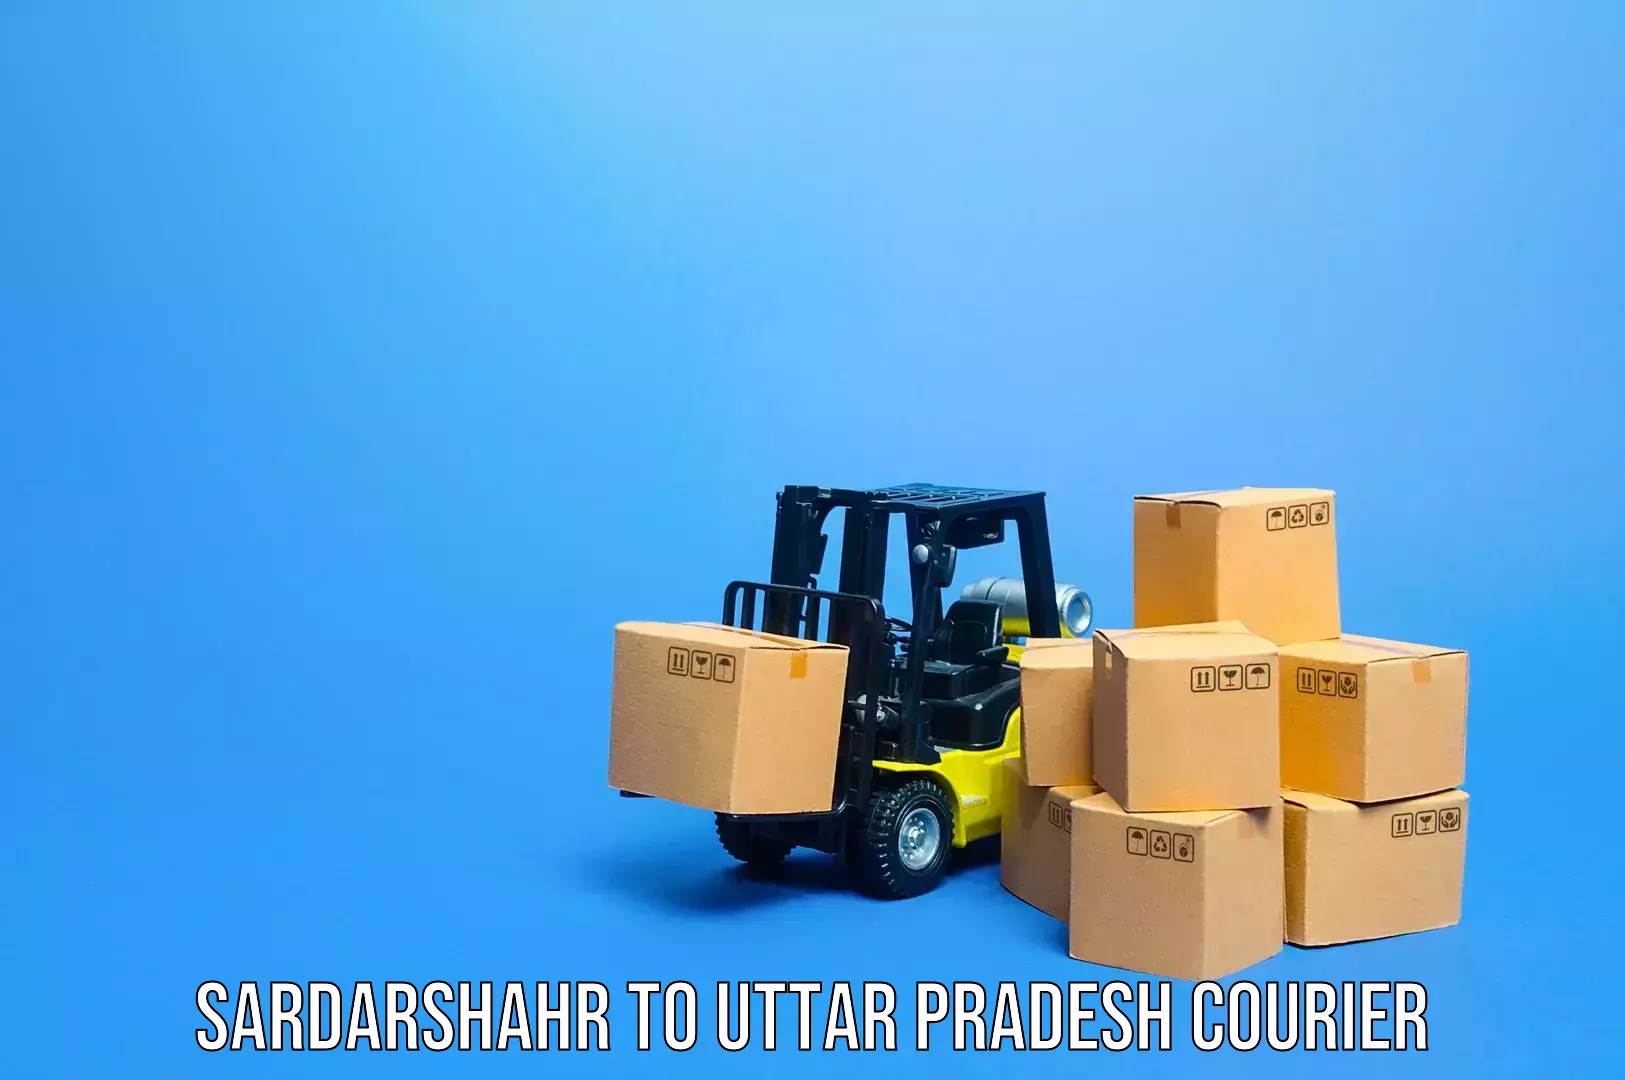 Luggage delivery system Sardarshahr to Agra